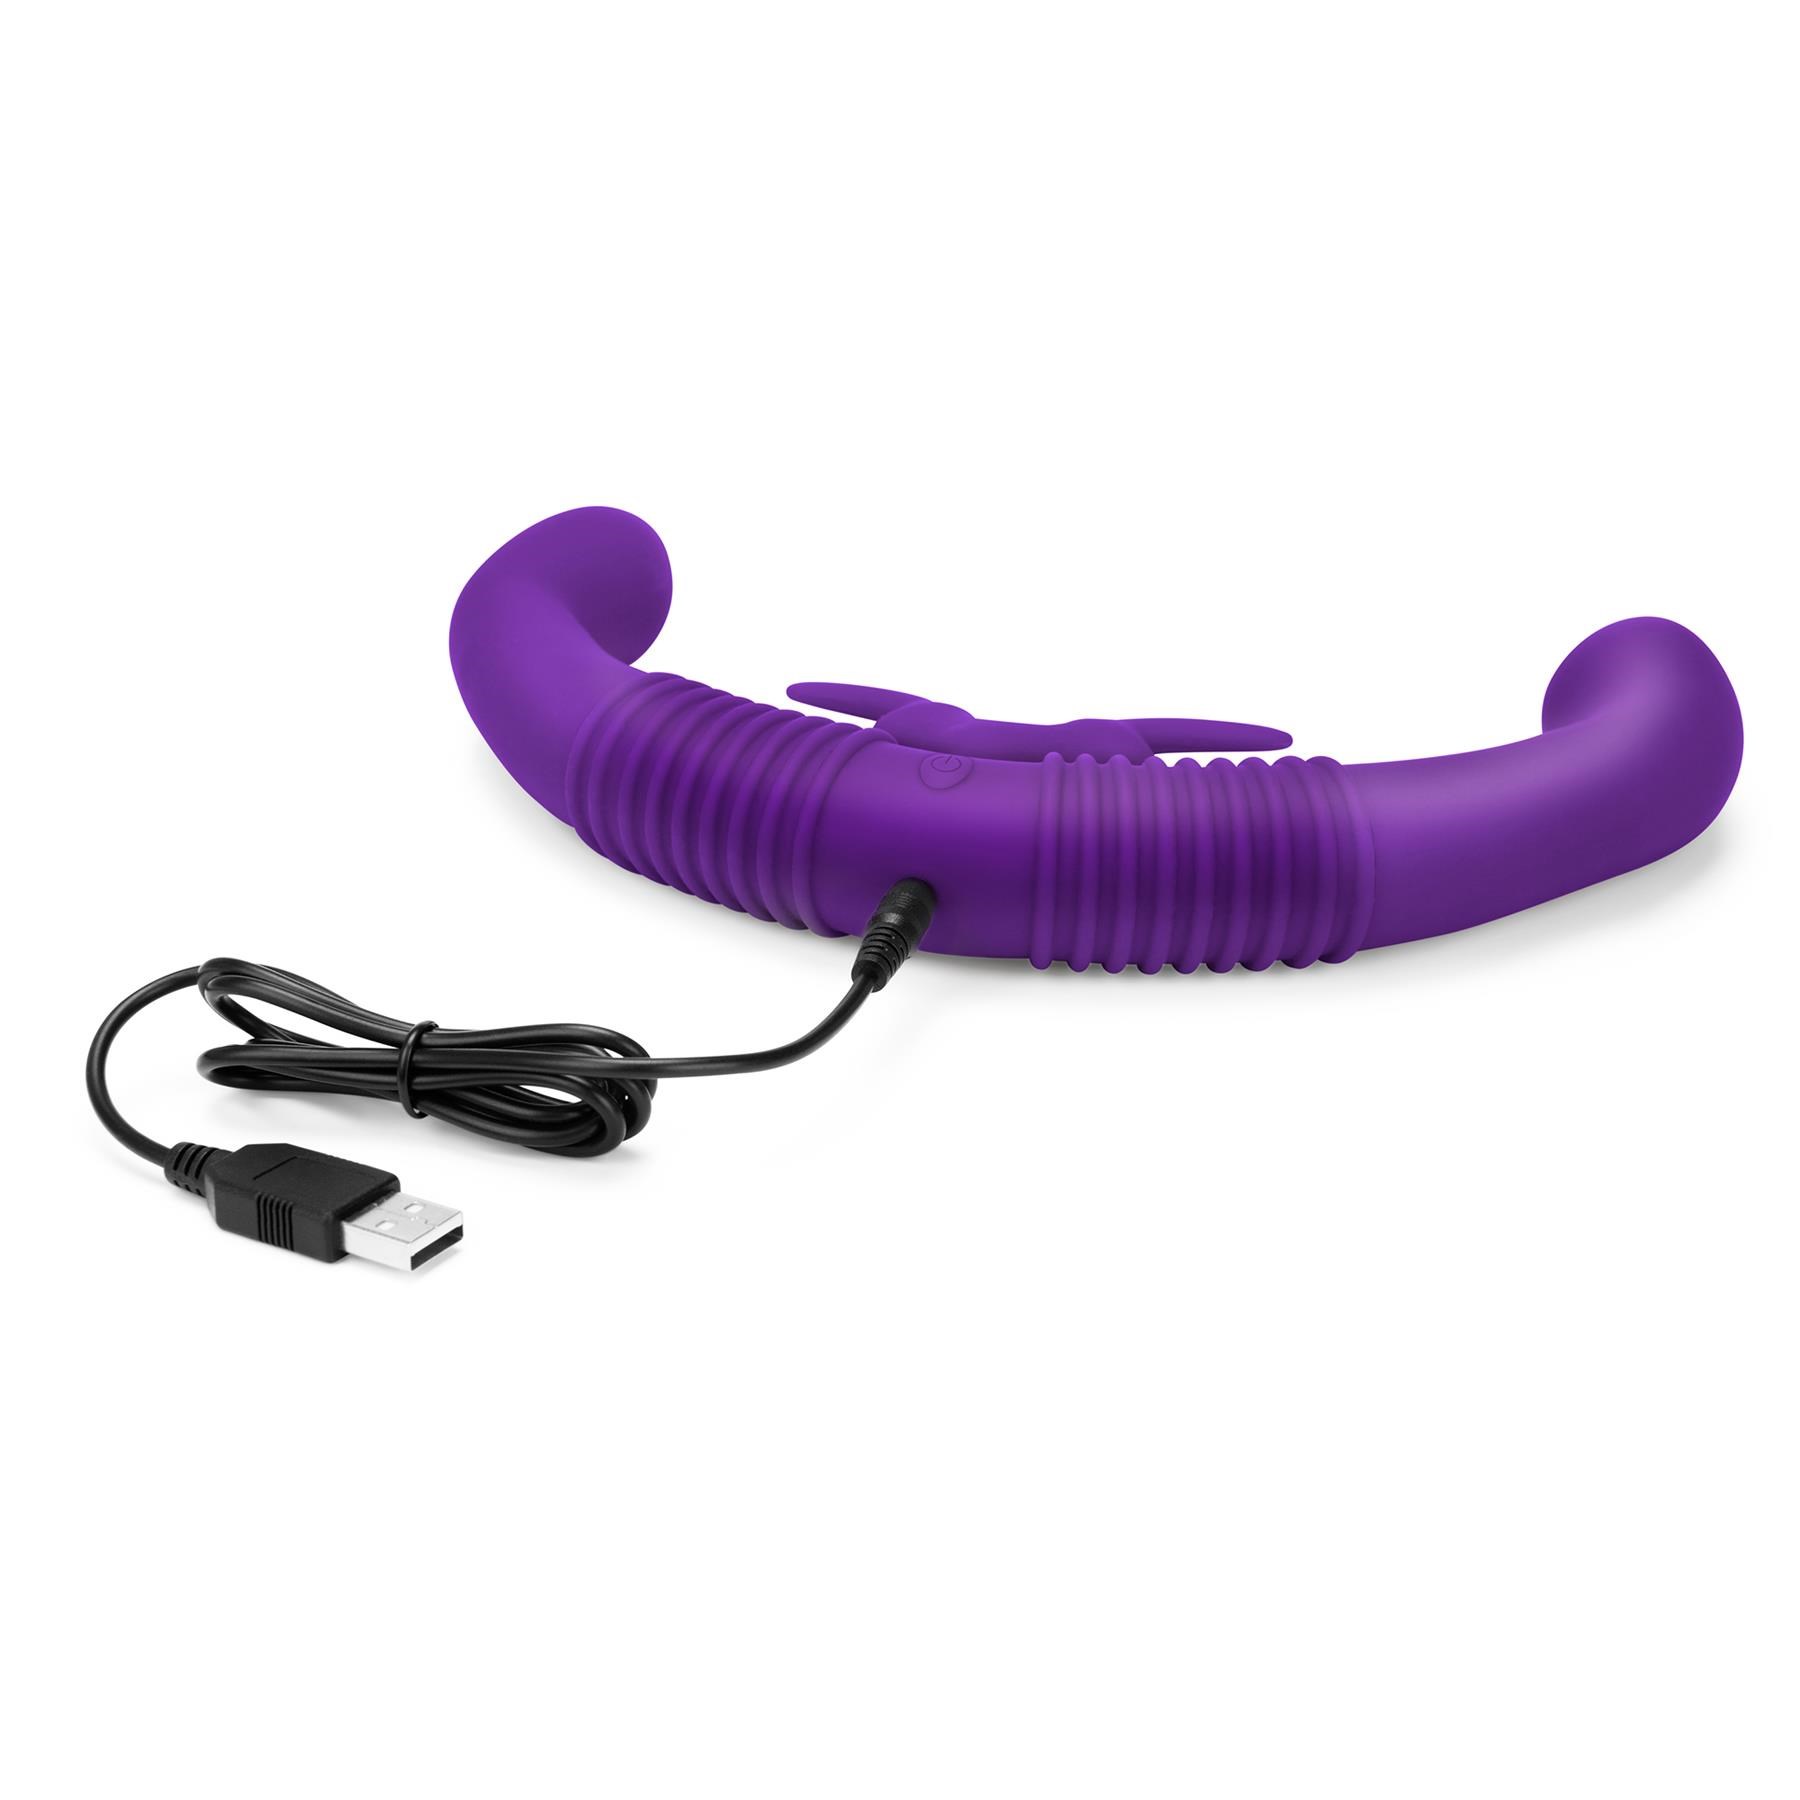 Together Toy Vibrating Double Dildo With Remote Control- Showing Where Charging Cable is Placed